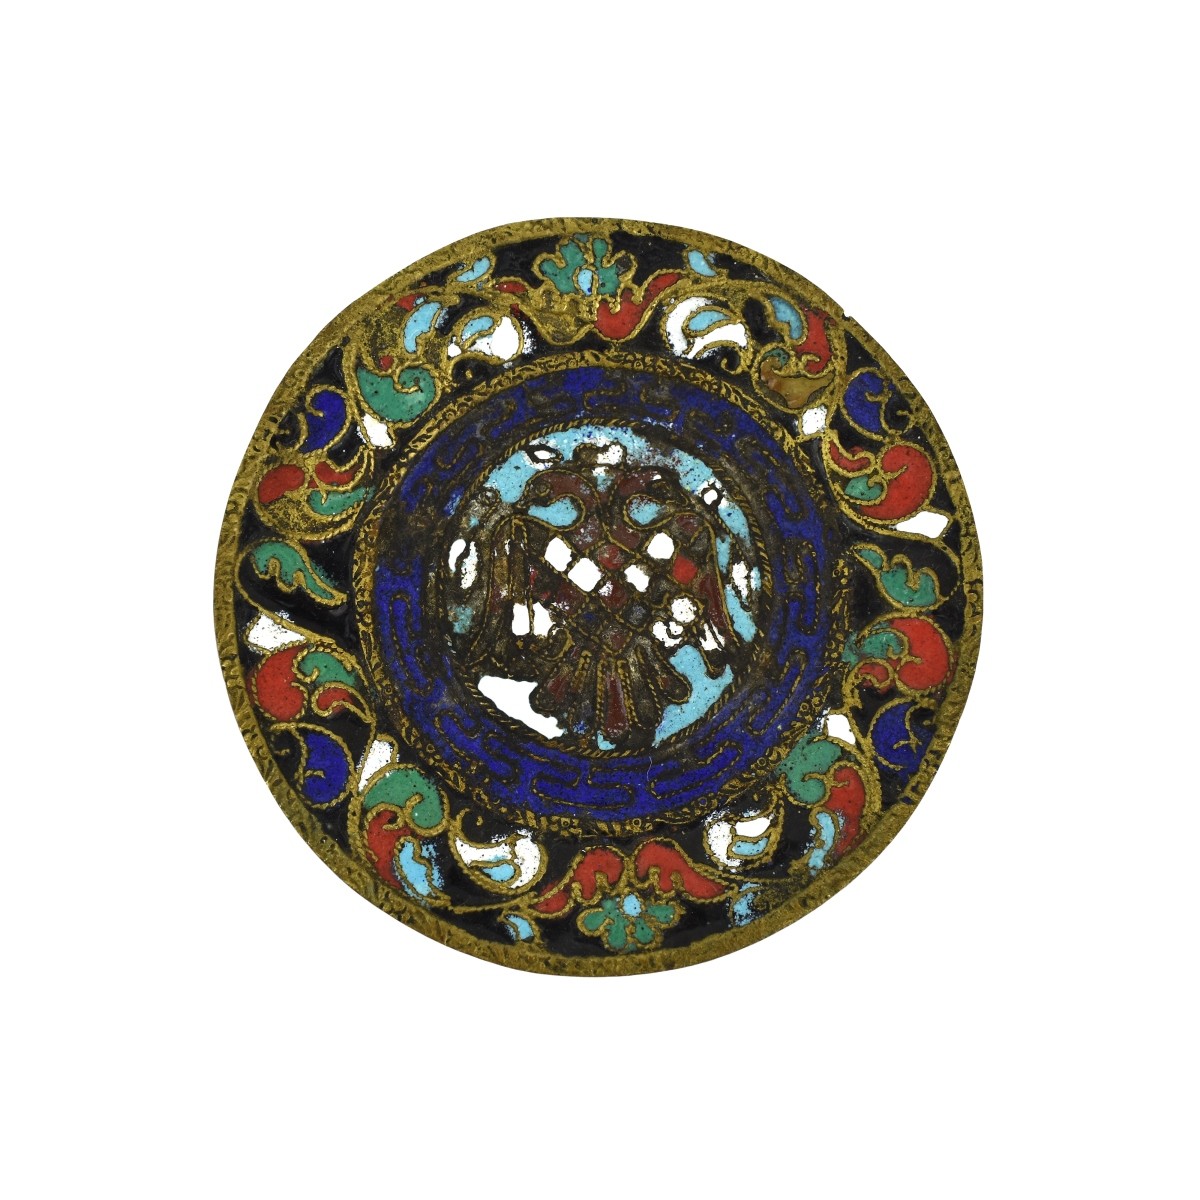 Grouping of Five (5) Chinese Cloisonne